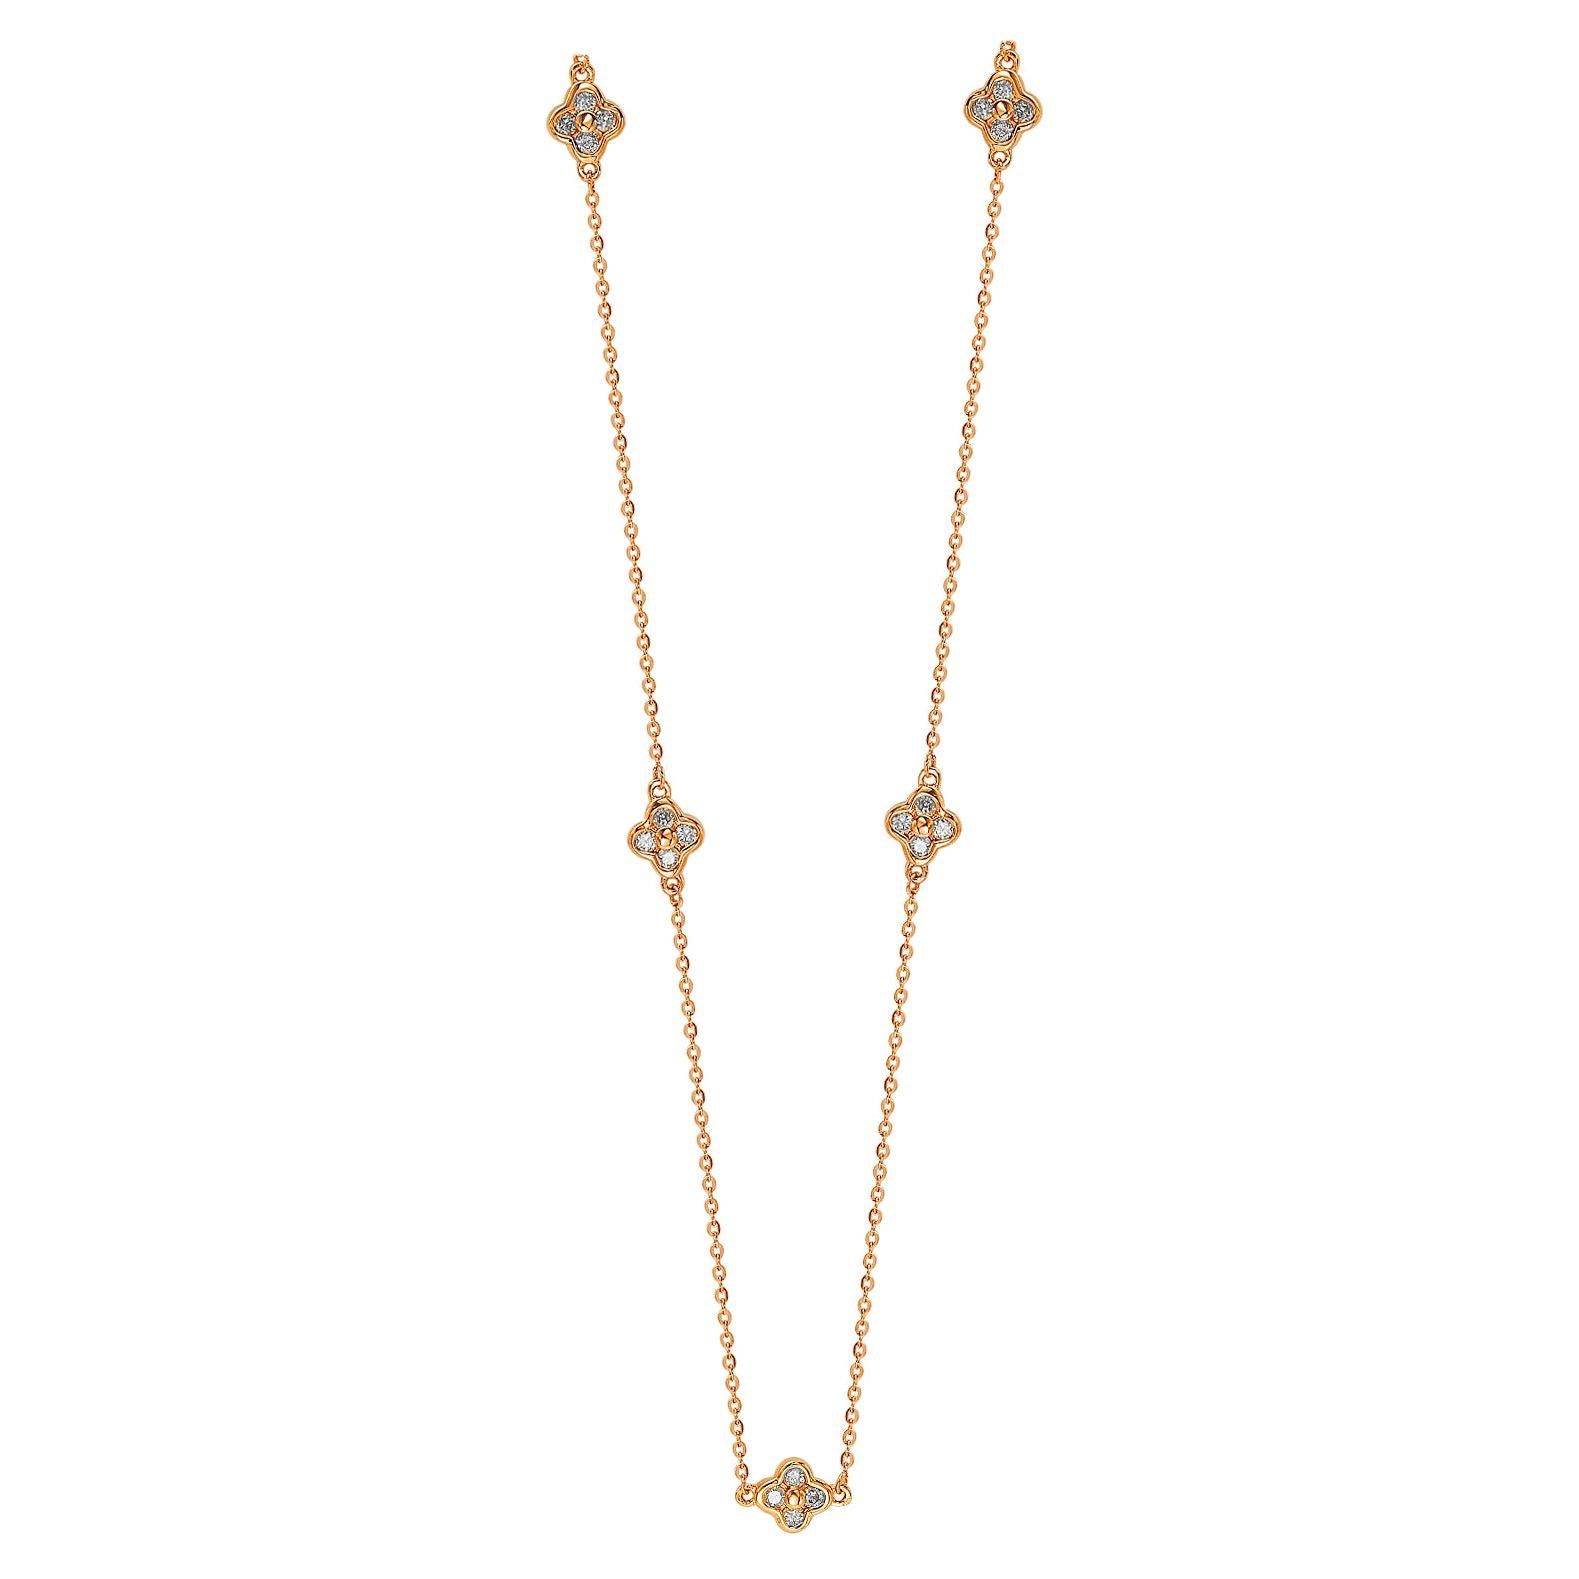 Suzy Levian - 14K 5 Clover The Yard Station Necklace Chinese Contemporary Diamond Rose Gold